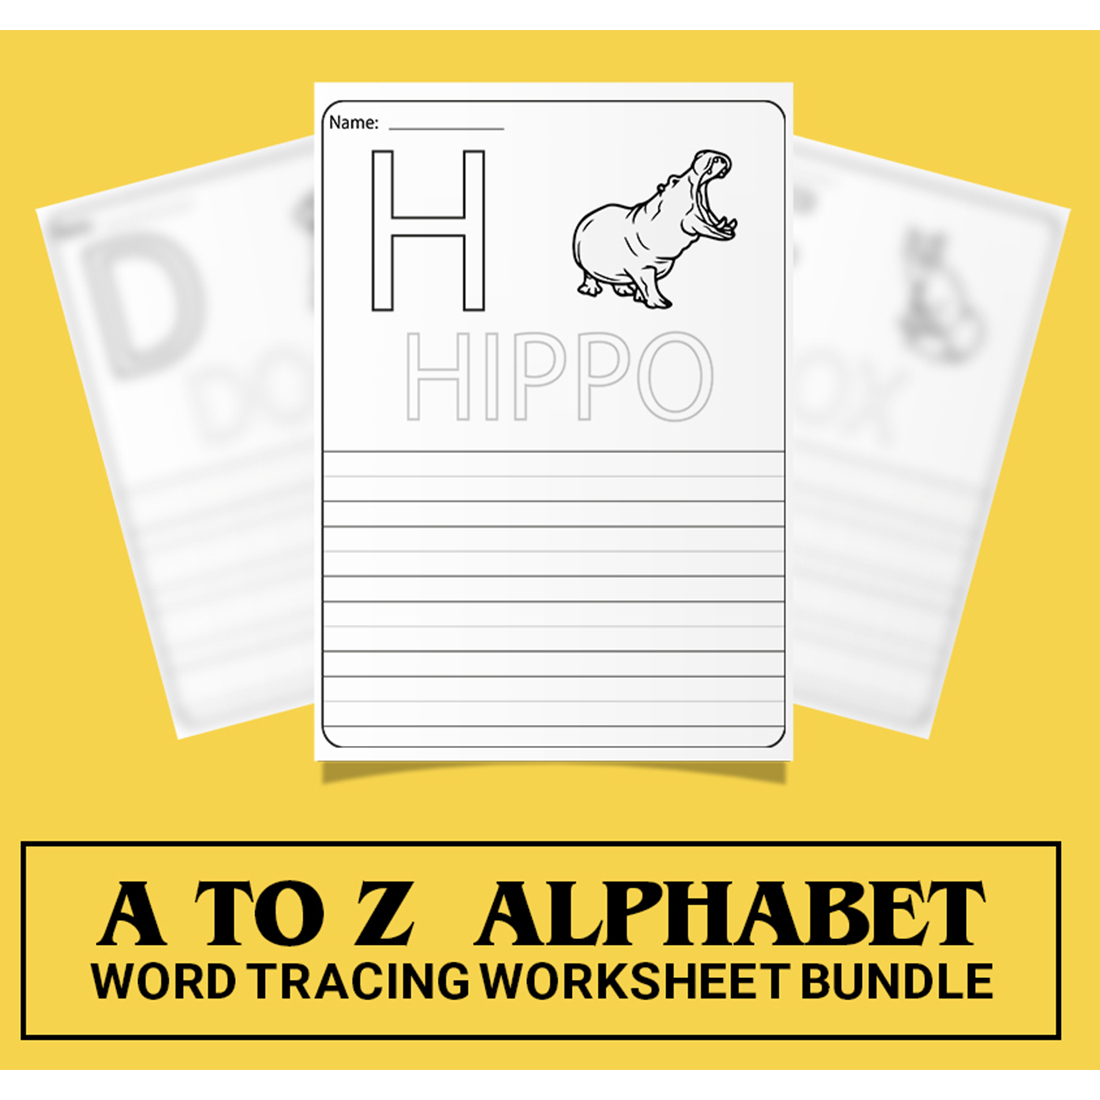 A pack of images of charming sheets for learning the alphabet